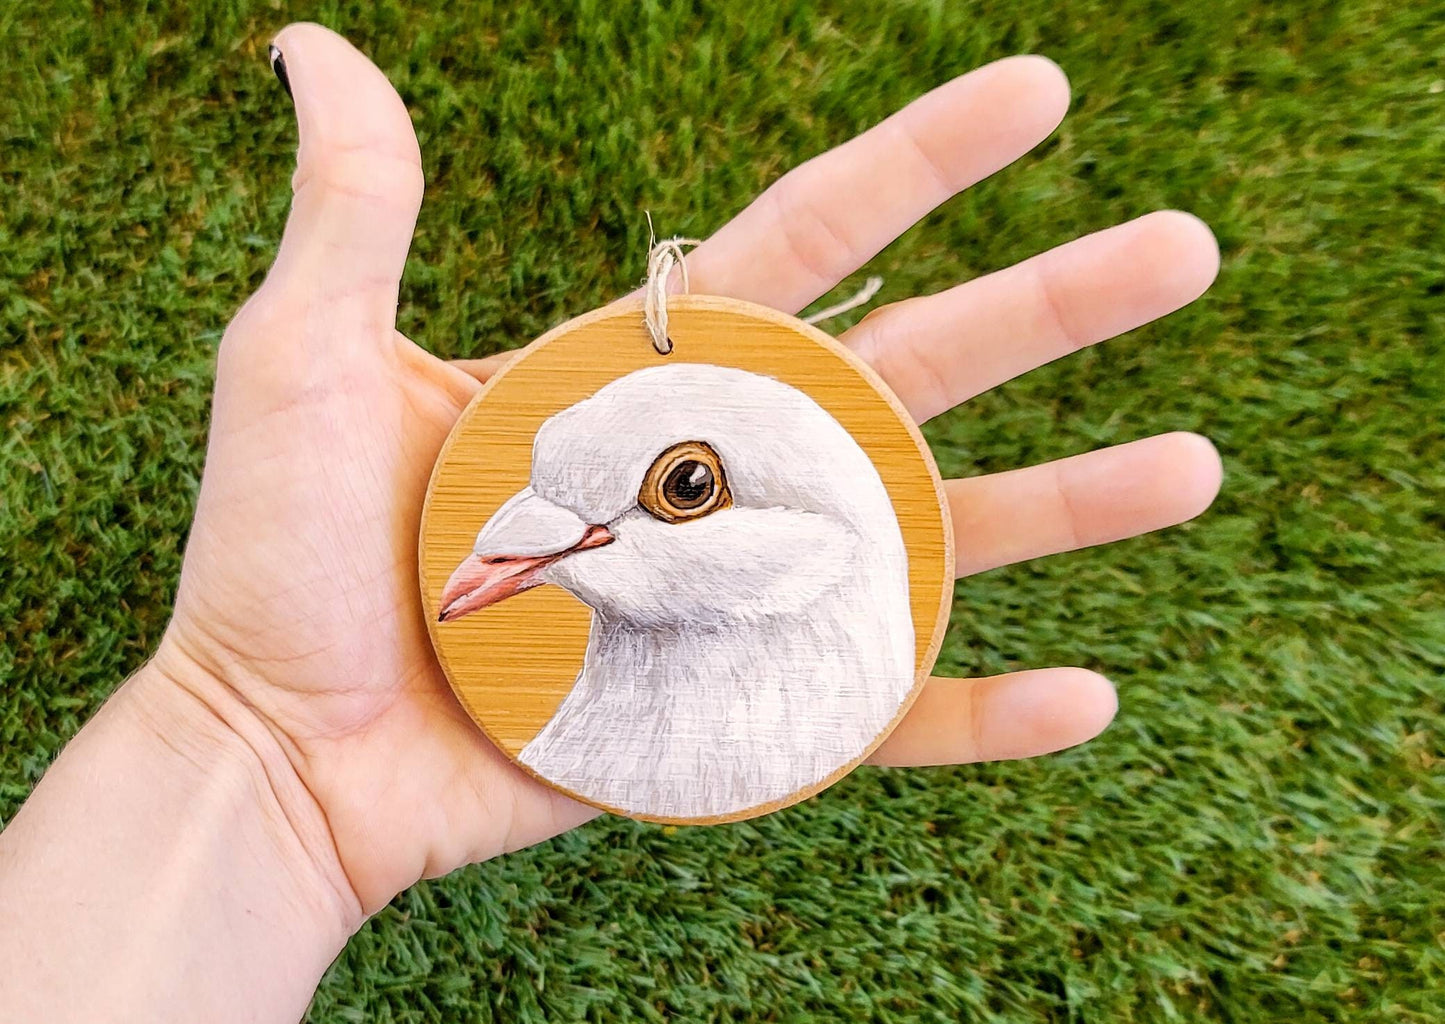 Release Dove - Bamboo Wood Slice, Hand Painted Bird on Wood,  dove acrylic painting, white pigeon, rock dove, peace dove ornament